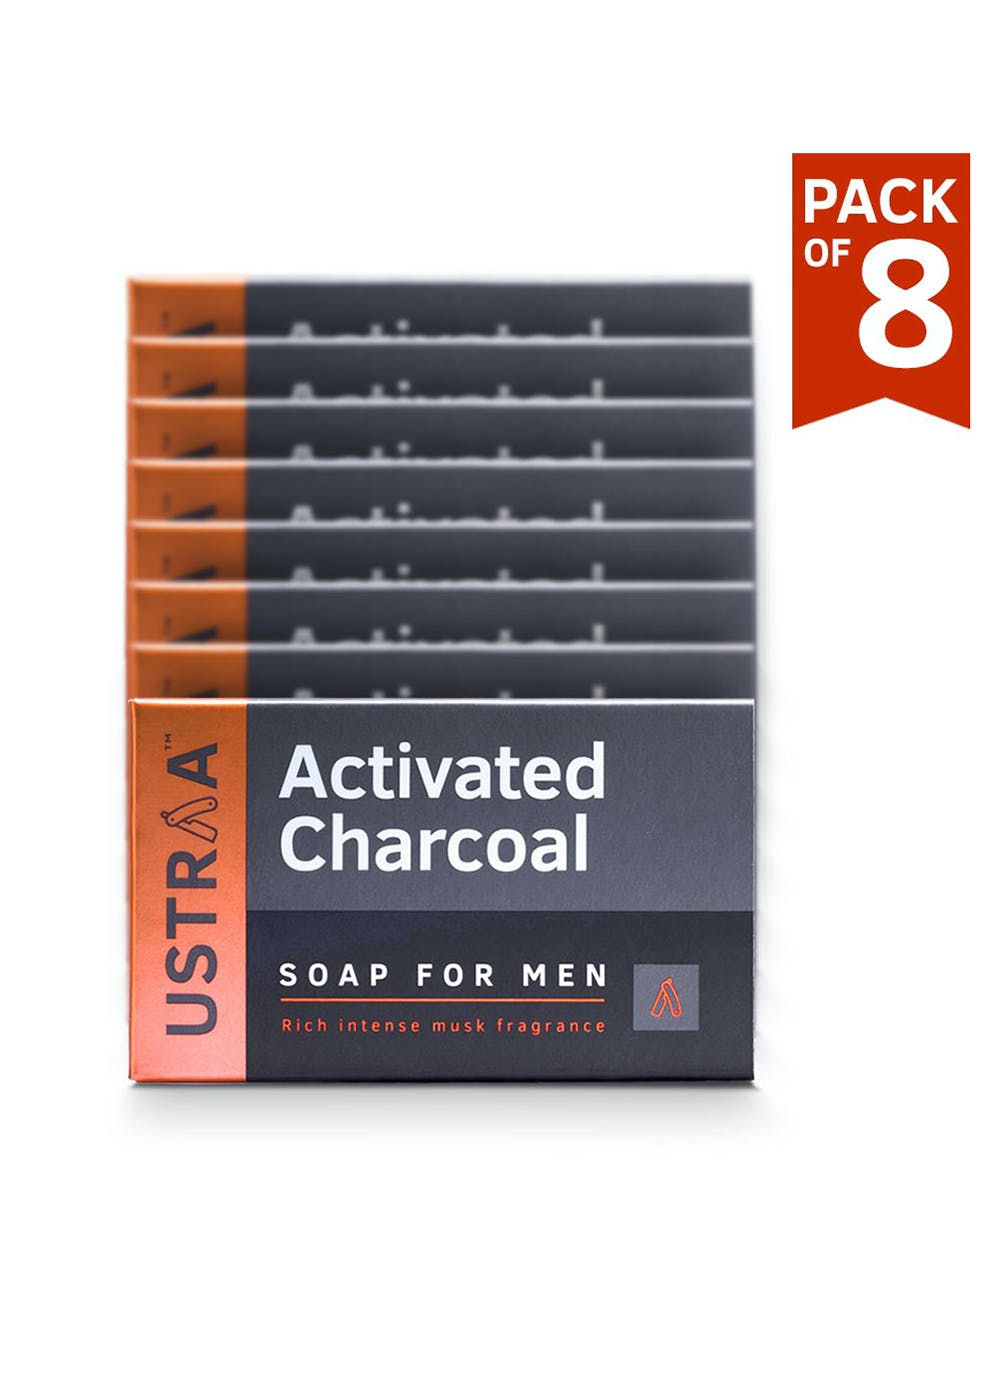 Activated Charcoal Soap (Pack of 8) - 100gm Each 